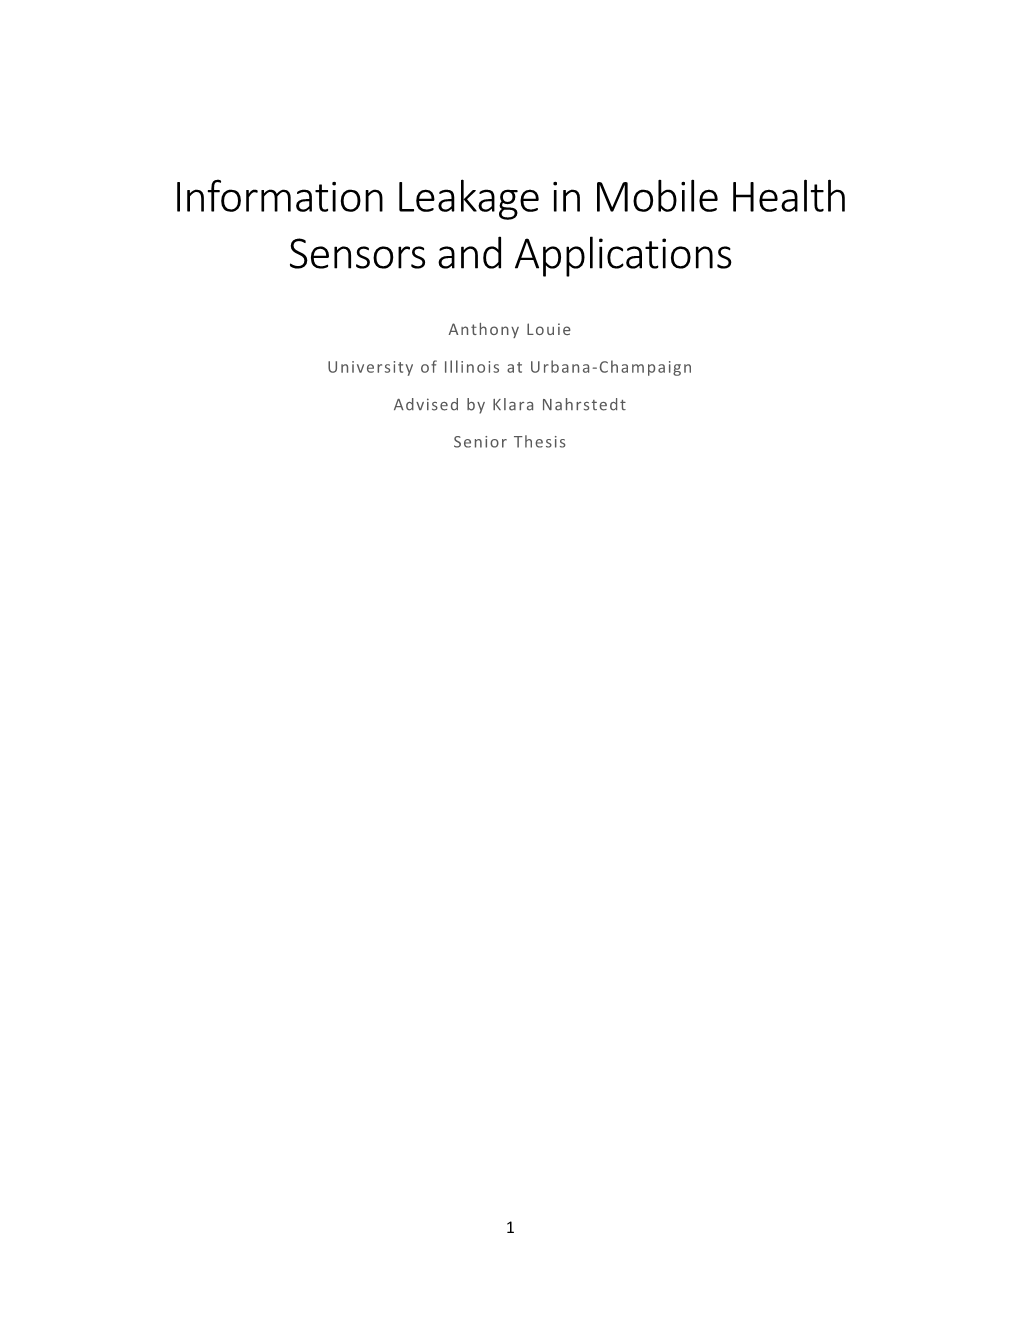 Anthony-Louie-Final-Information Leakage in Mobile Health Sensors